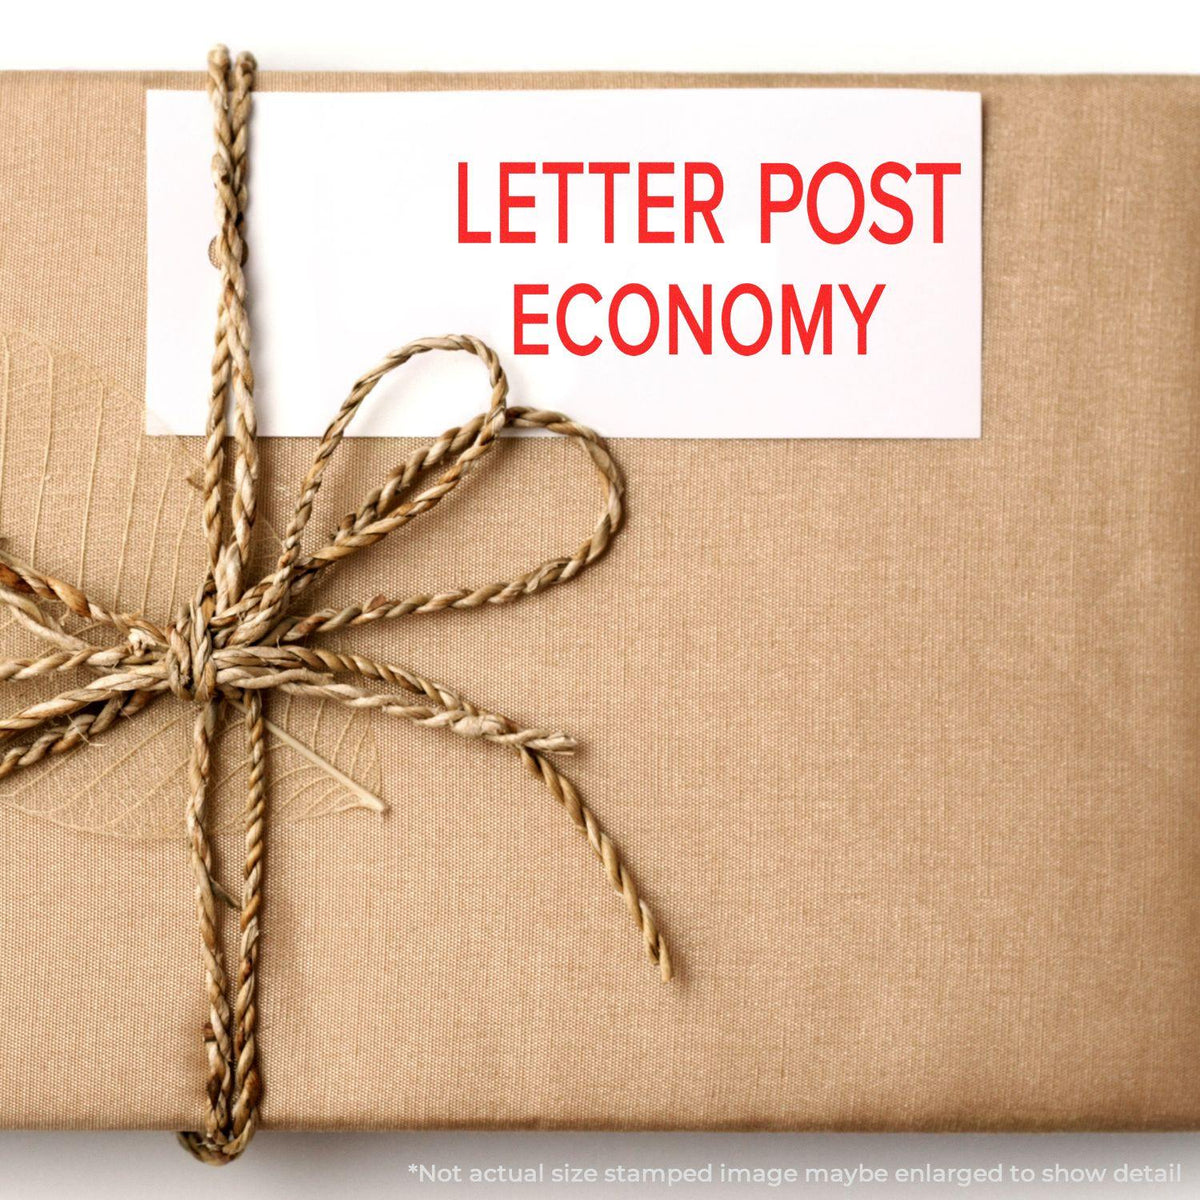 In Use Large Letter Post Economy Rubber Stamp Image